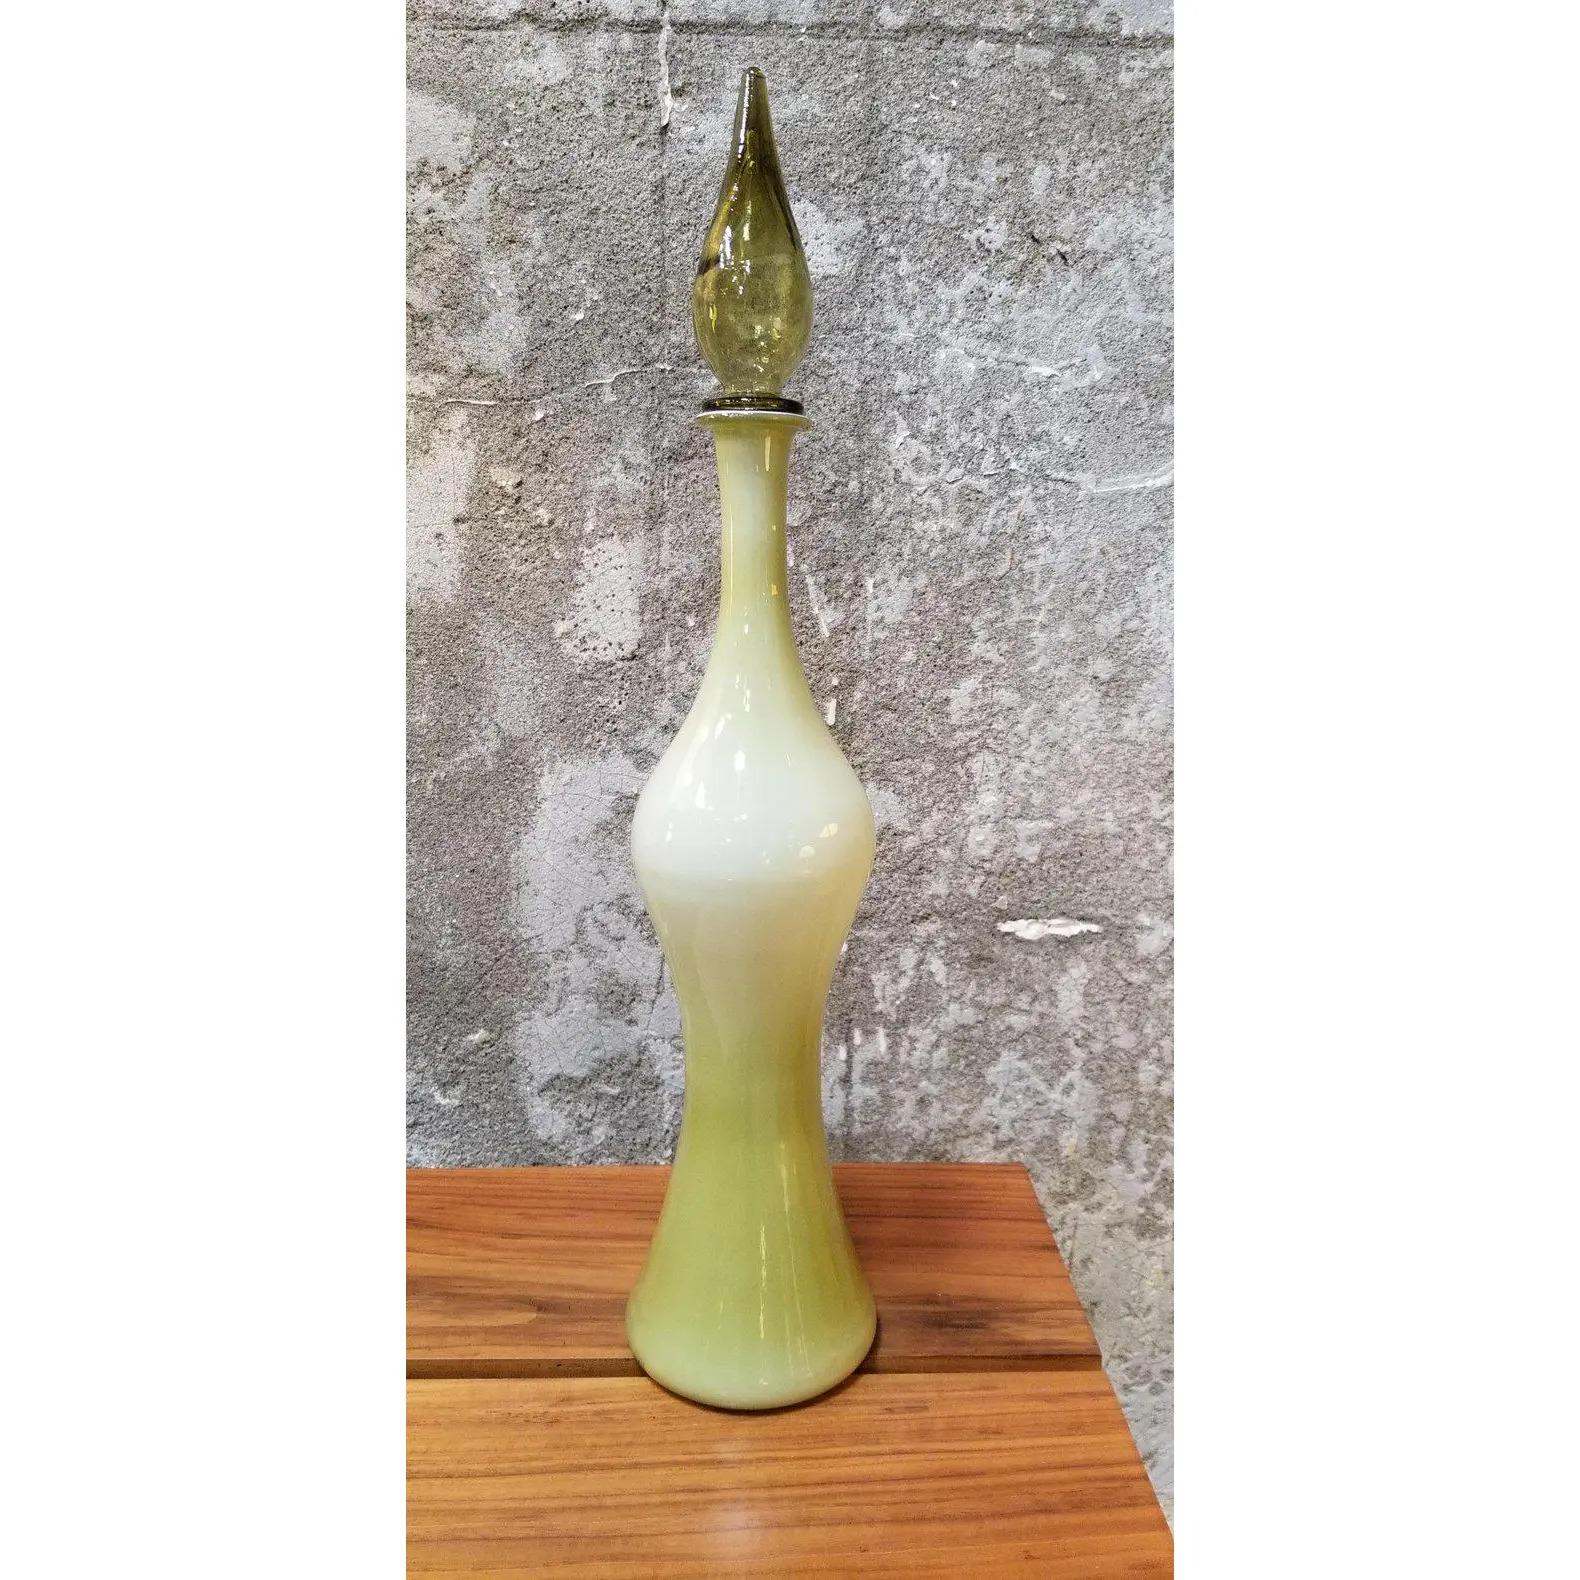 Mid-Century Modern cased glass decanter with original stopper by Empoli Glass, Italy, circa 1960s. Paper label intact.